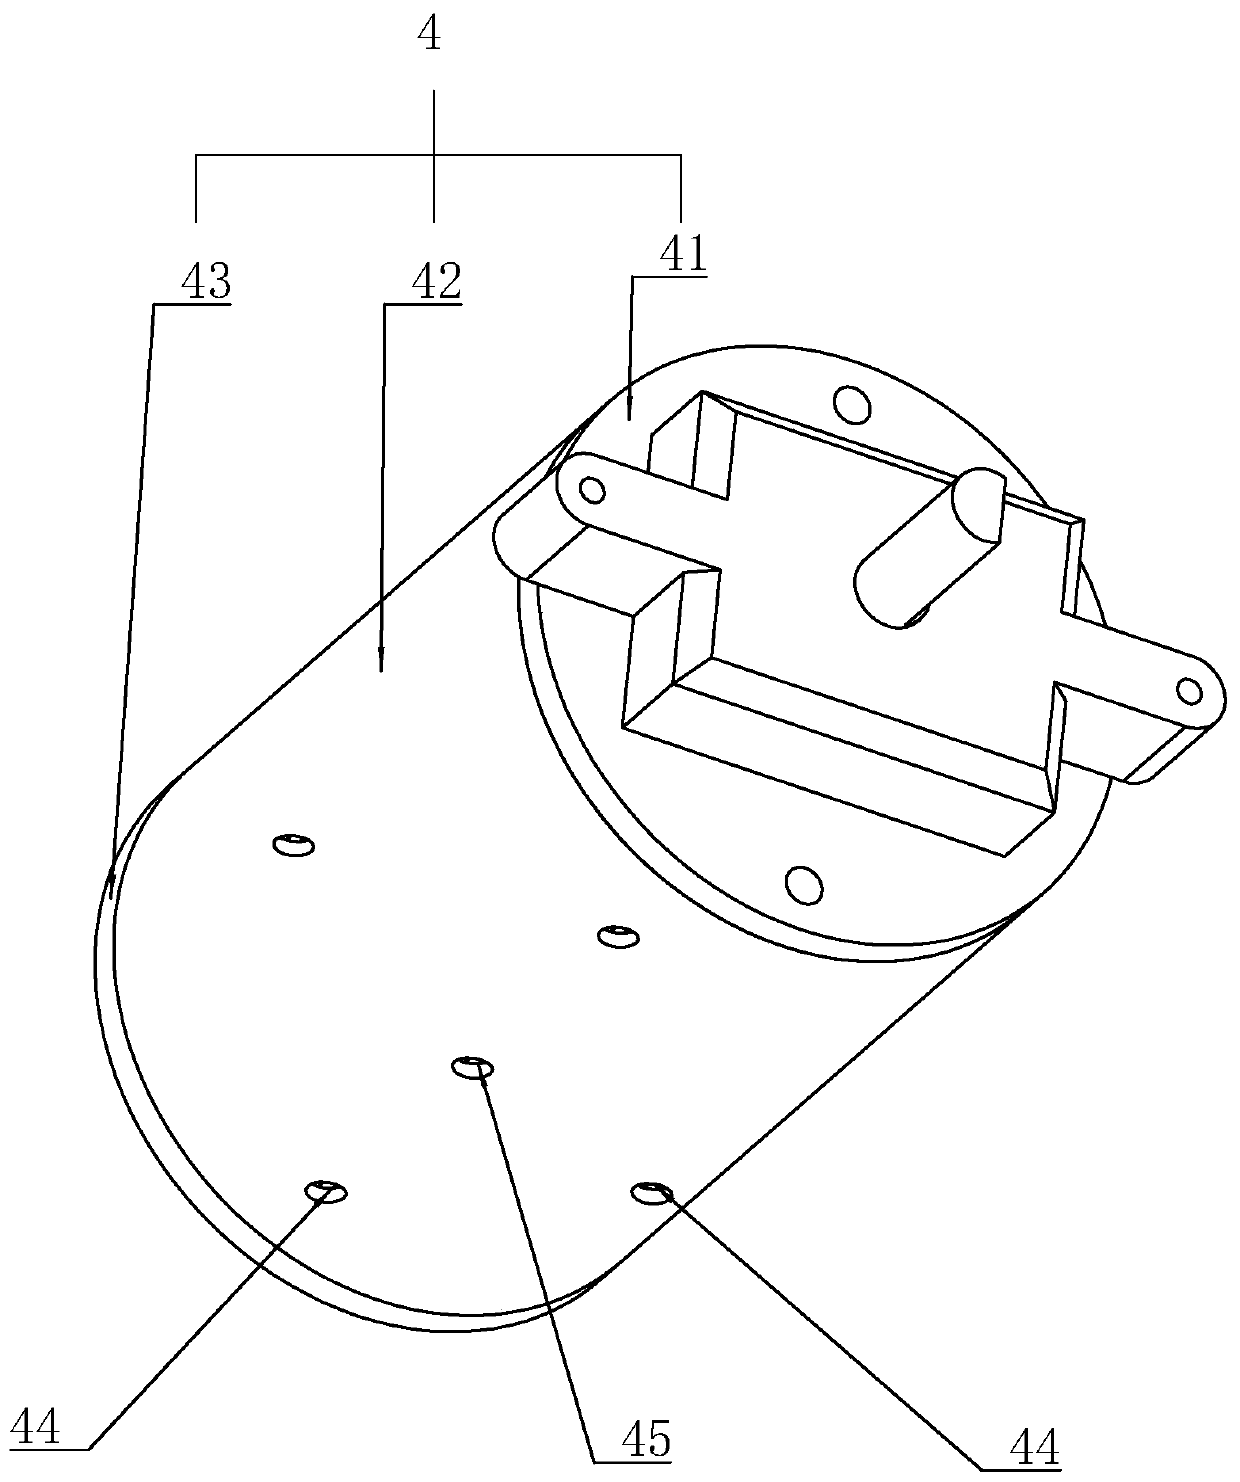 An easy-to-disassemble steel pipe motor assembly